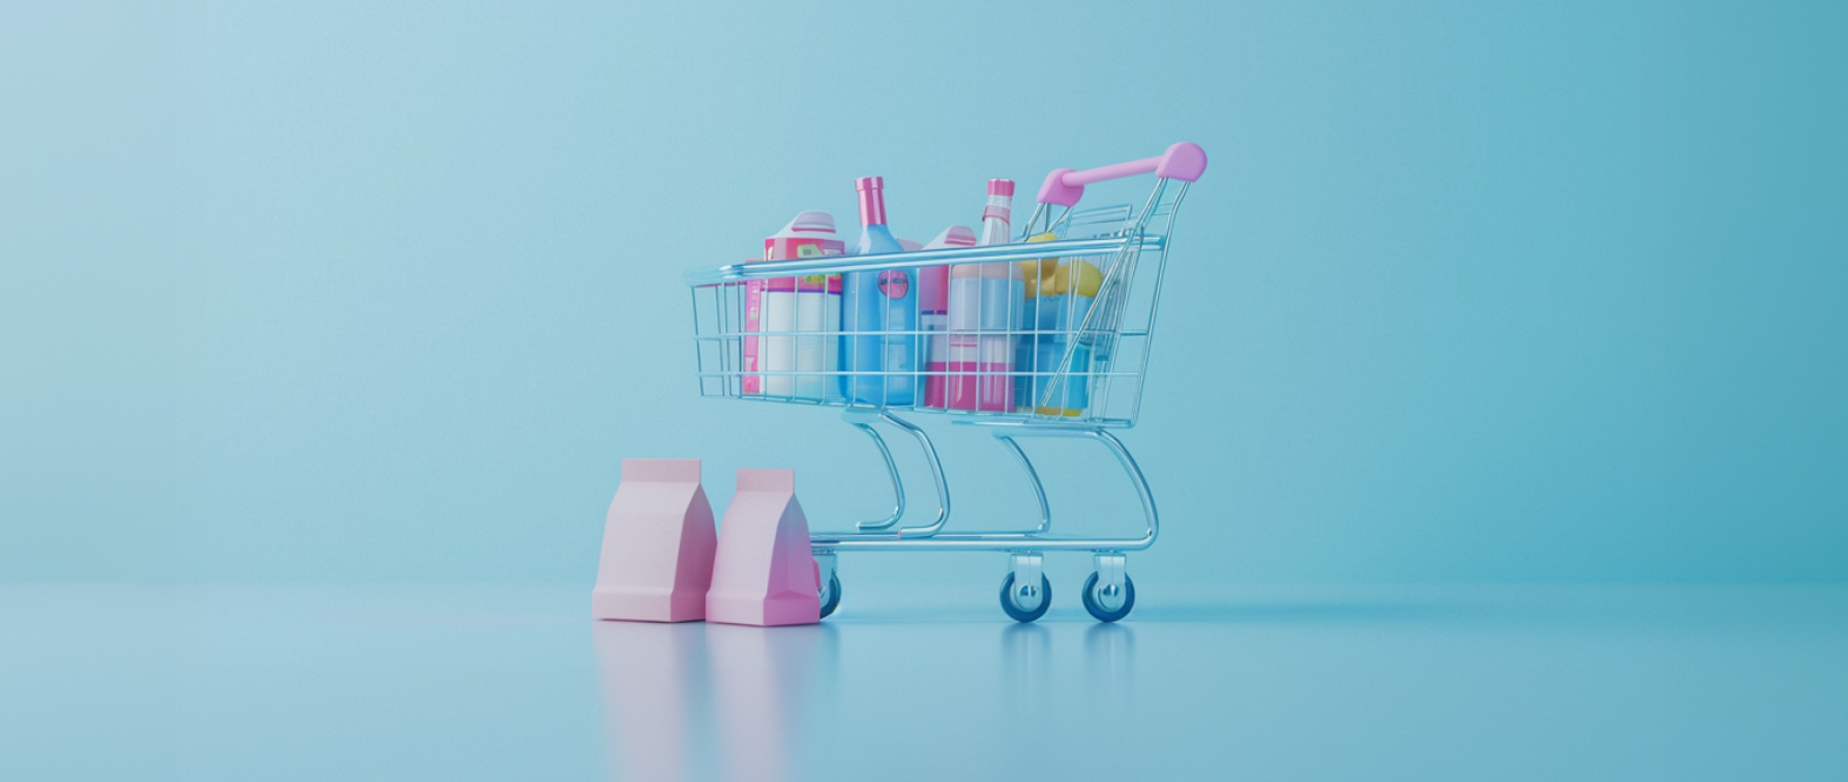 A full grocery cart with two pink bags next to it on a blue background.